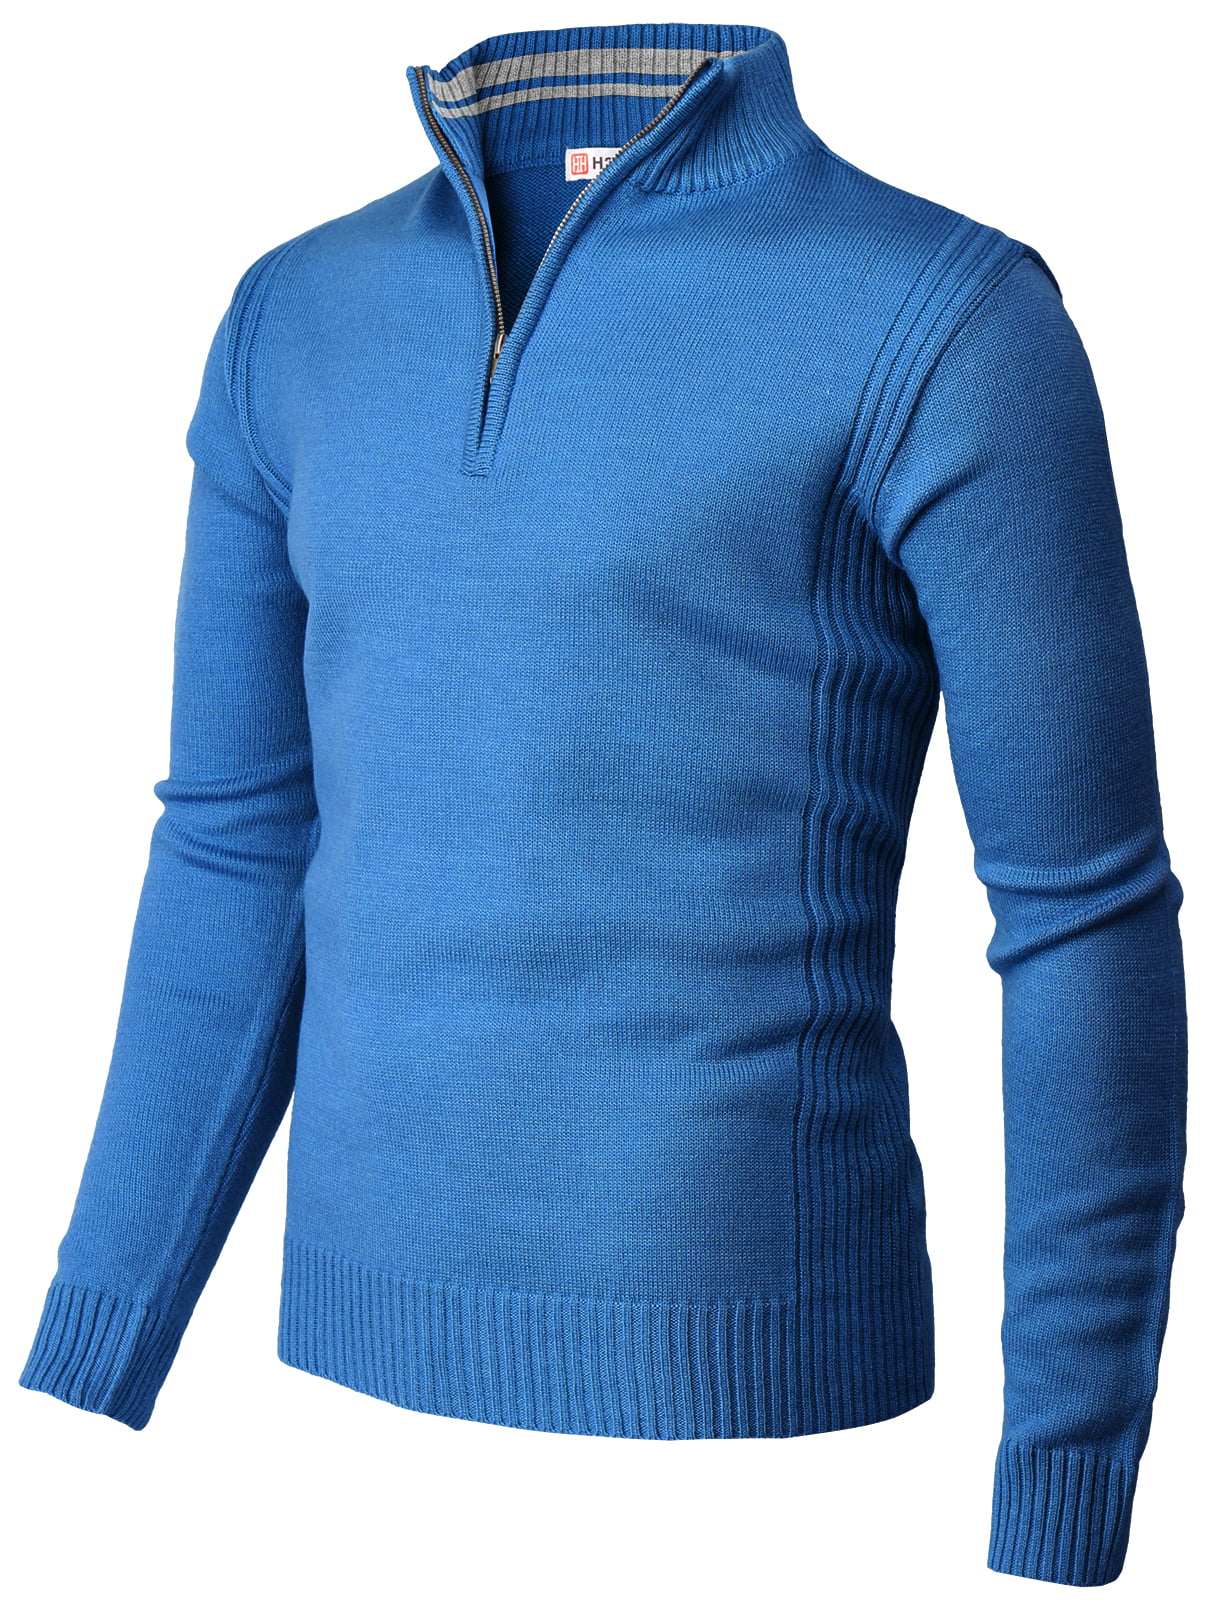 Freely Mens Slim Casual Mock Neck Long Sleeve Knitting Sweater Pullover